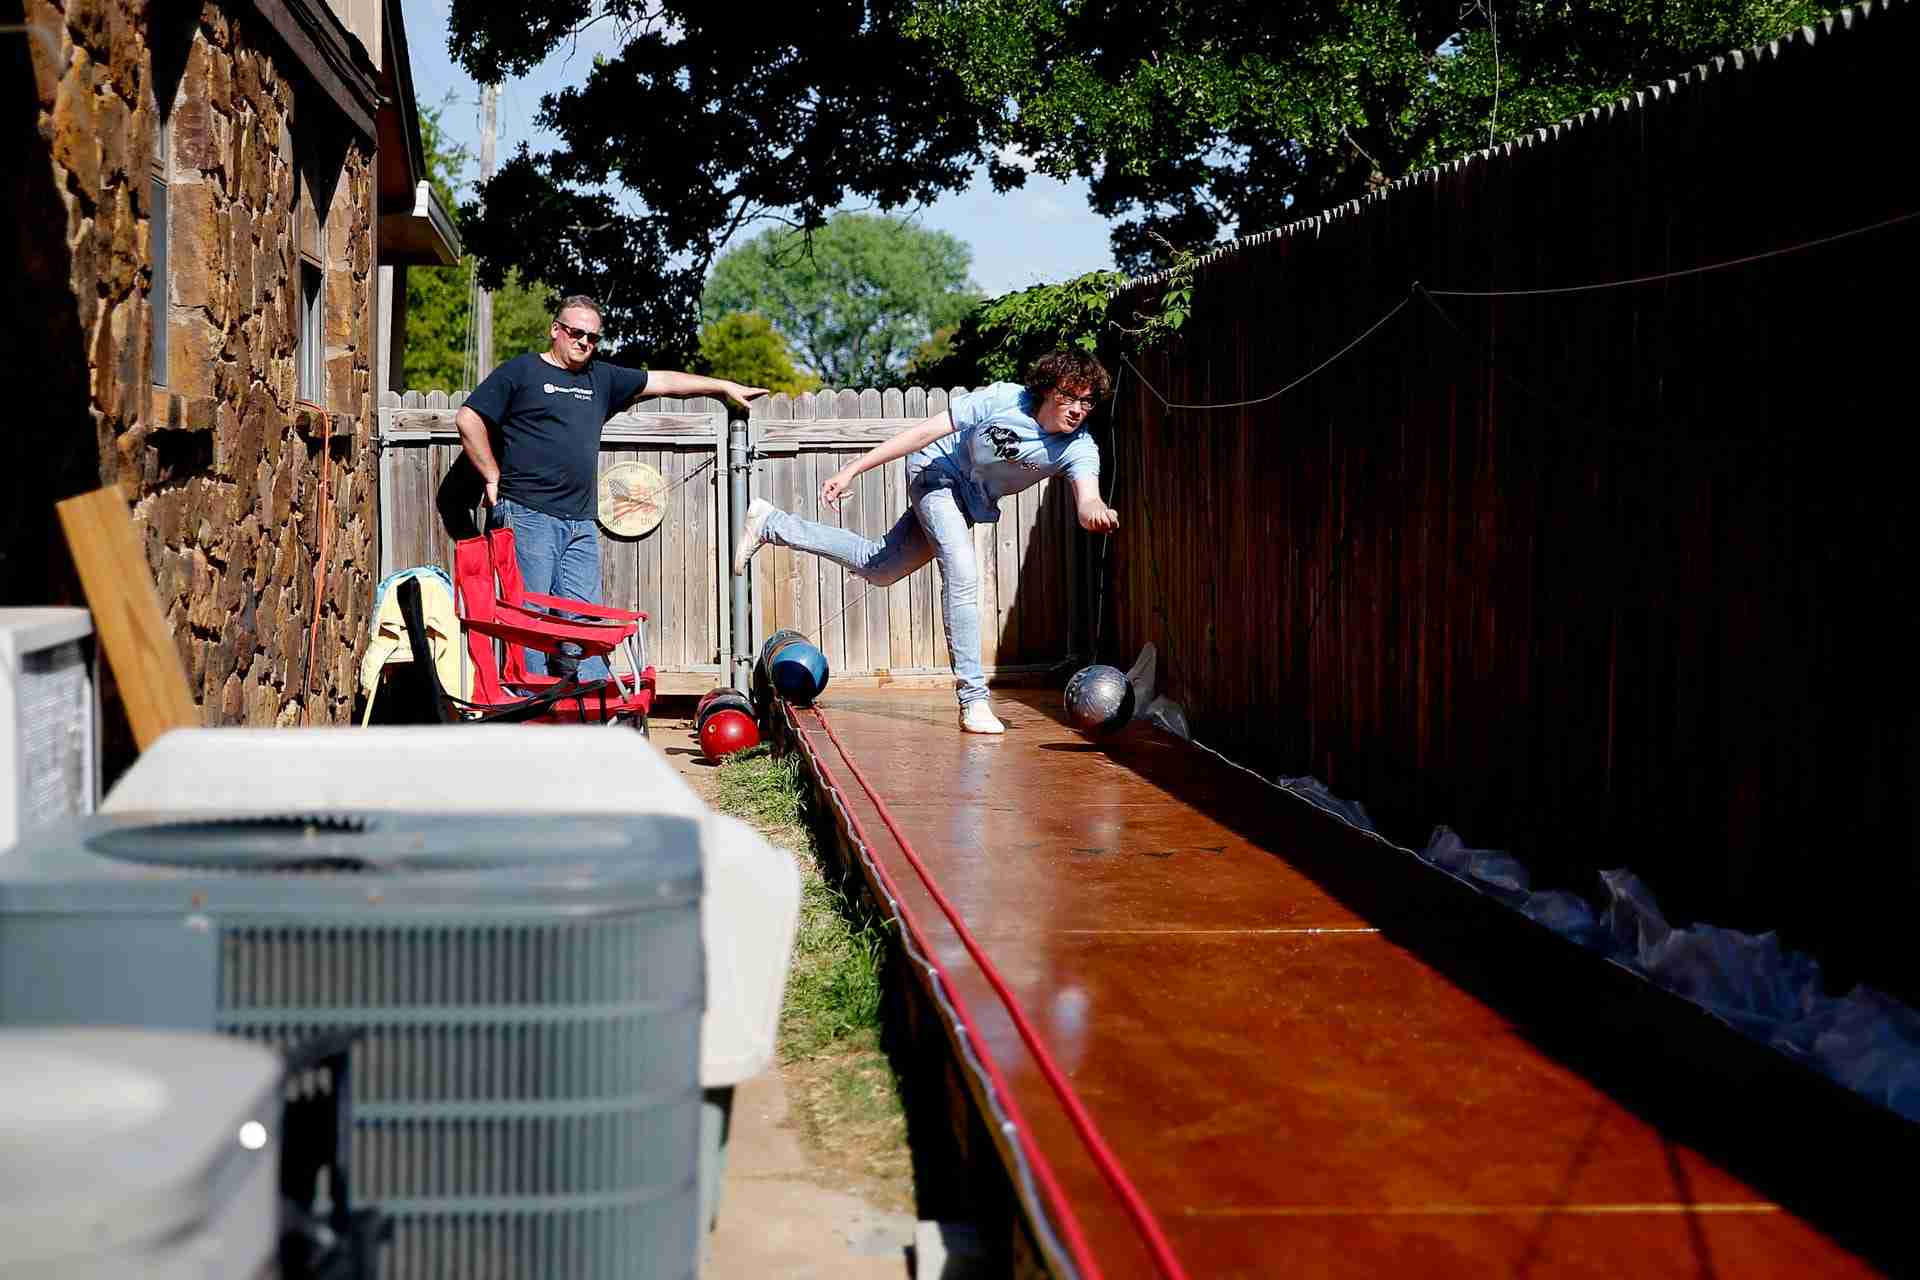 Eric Jones, 15, bowls as his dad, Heath, watches in the backyard of their Oklahoma City home, Tuesday, April 21, 2020. Health and his son Eric built a bowling lane in their backyard so that Eric, a competitive bowler, could continue to bowl while bowling alleys are closed. 